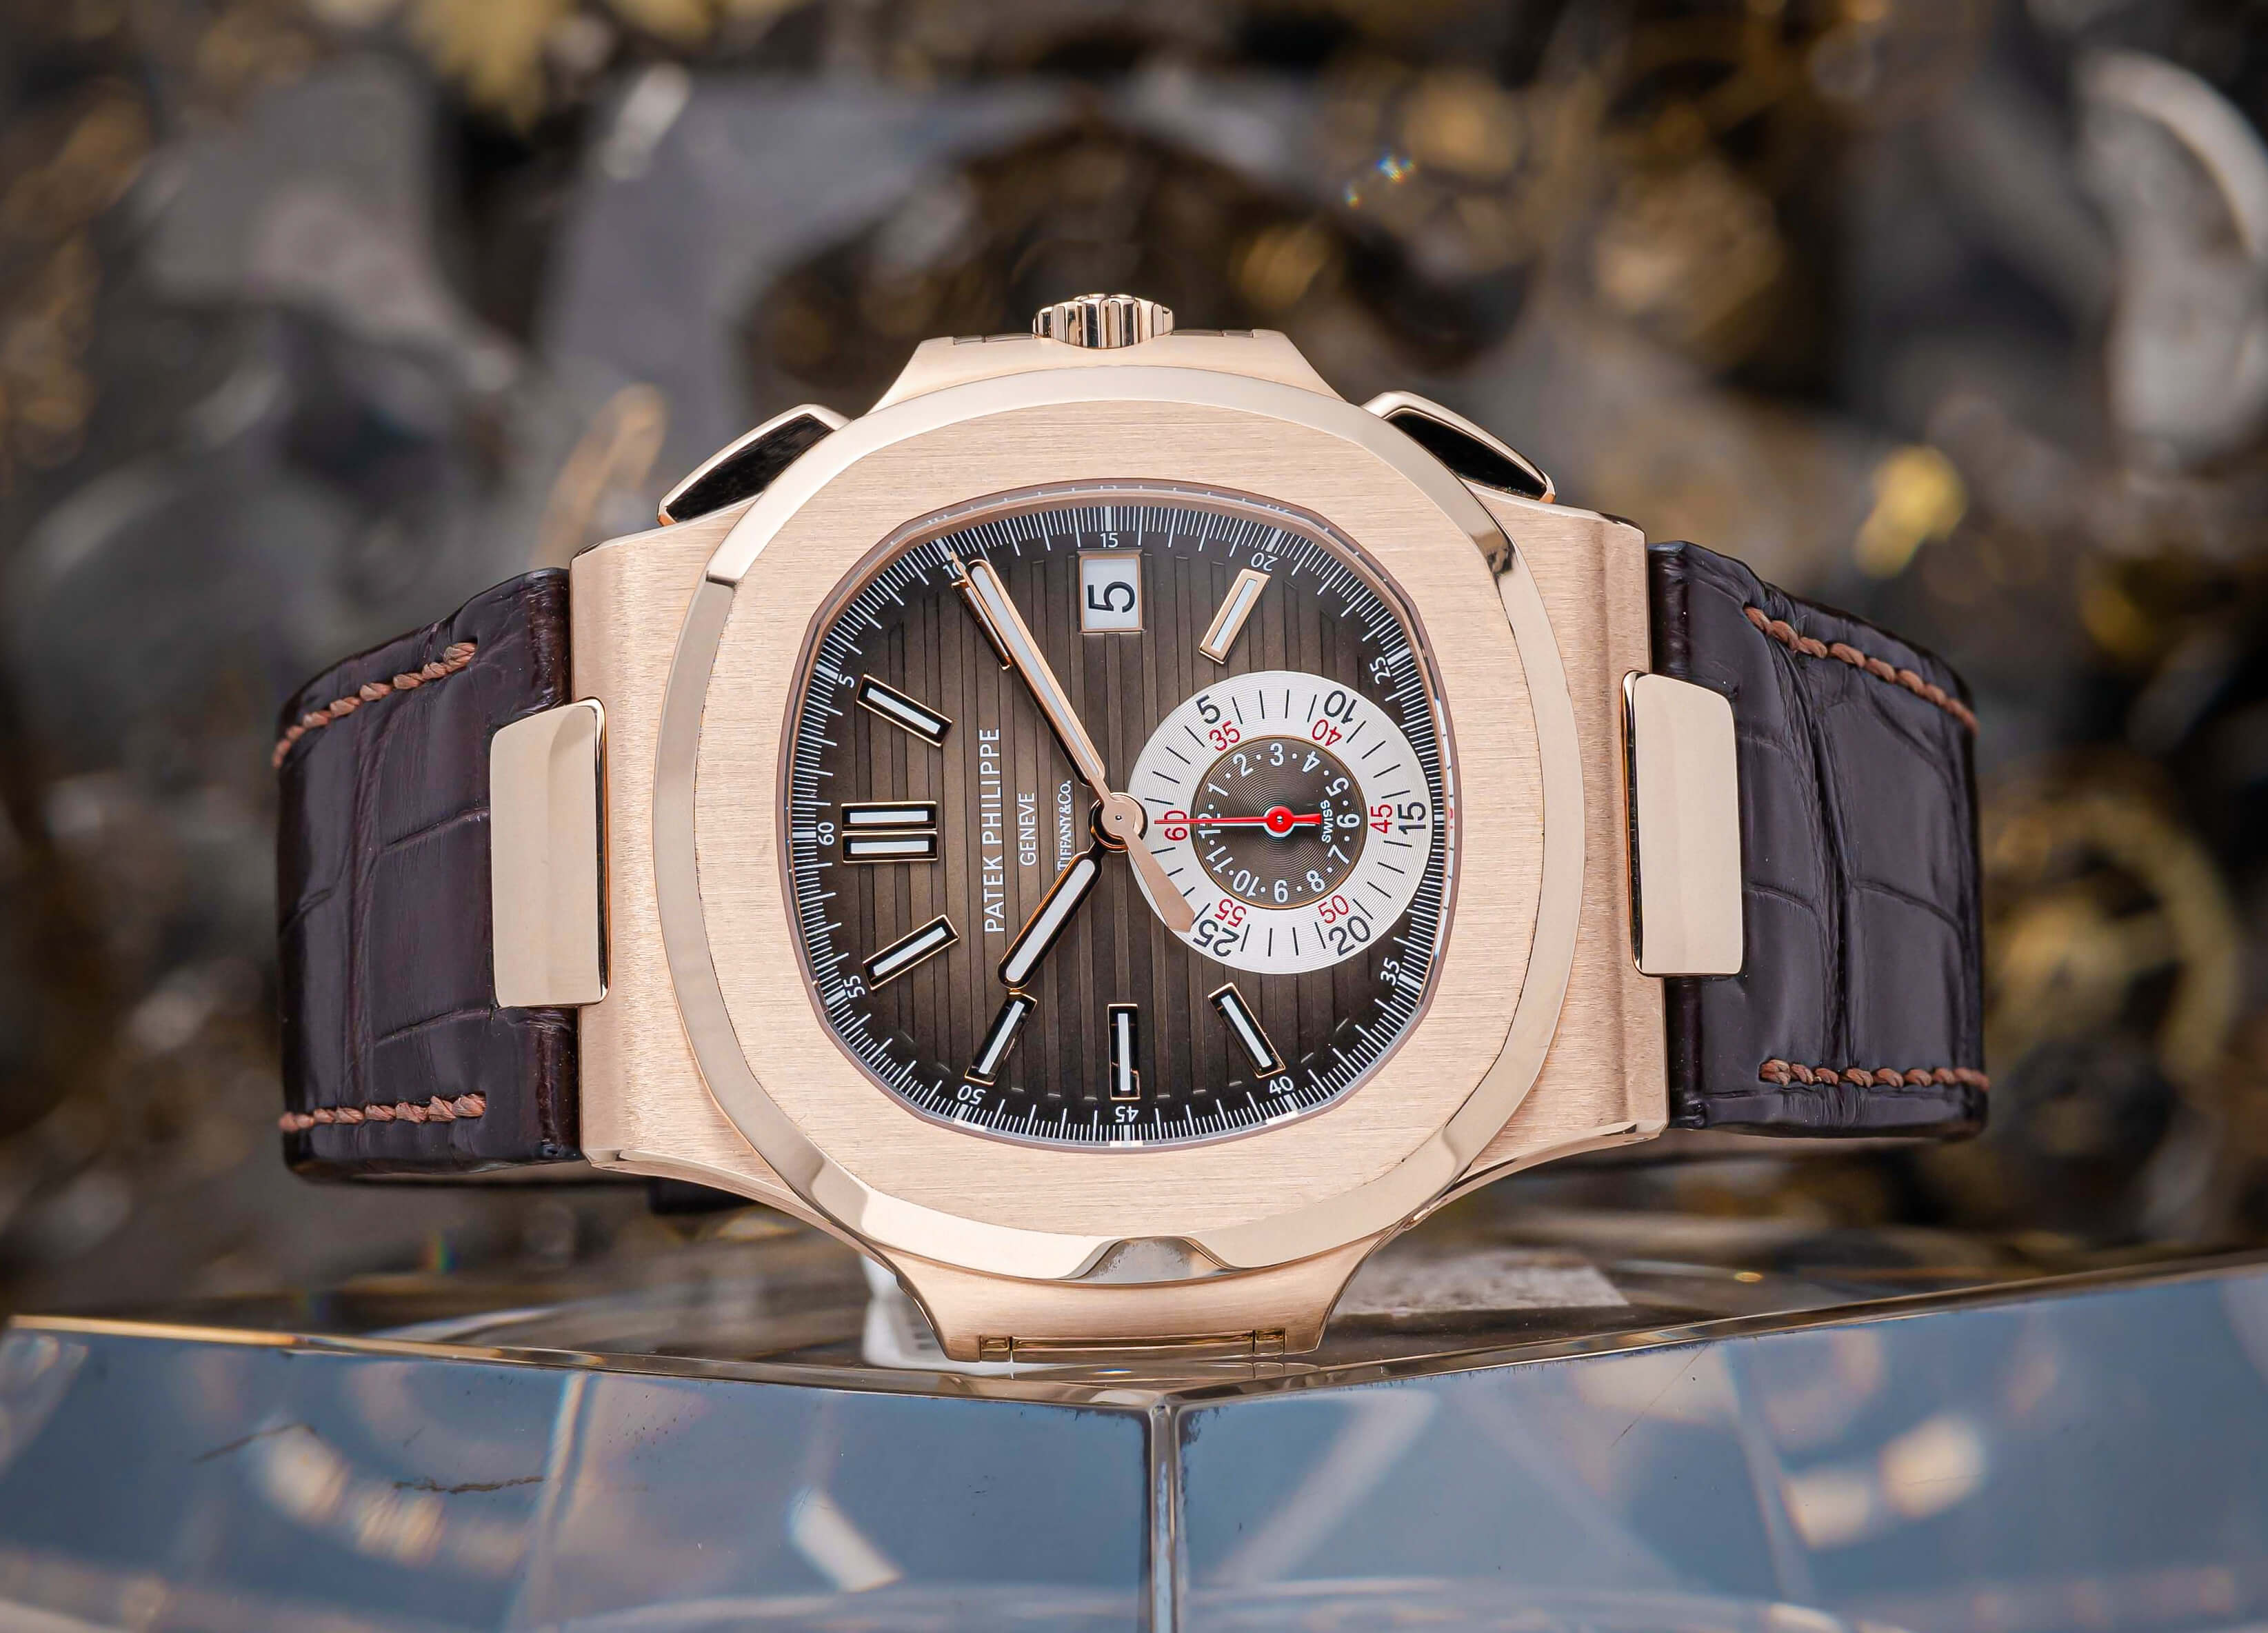 18K Rose Gold Patek Philippe Nautilus Chronograph with 40 mm Case, Brown Index Dial, Leather Bracelet, and Date Function.